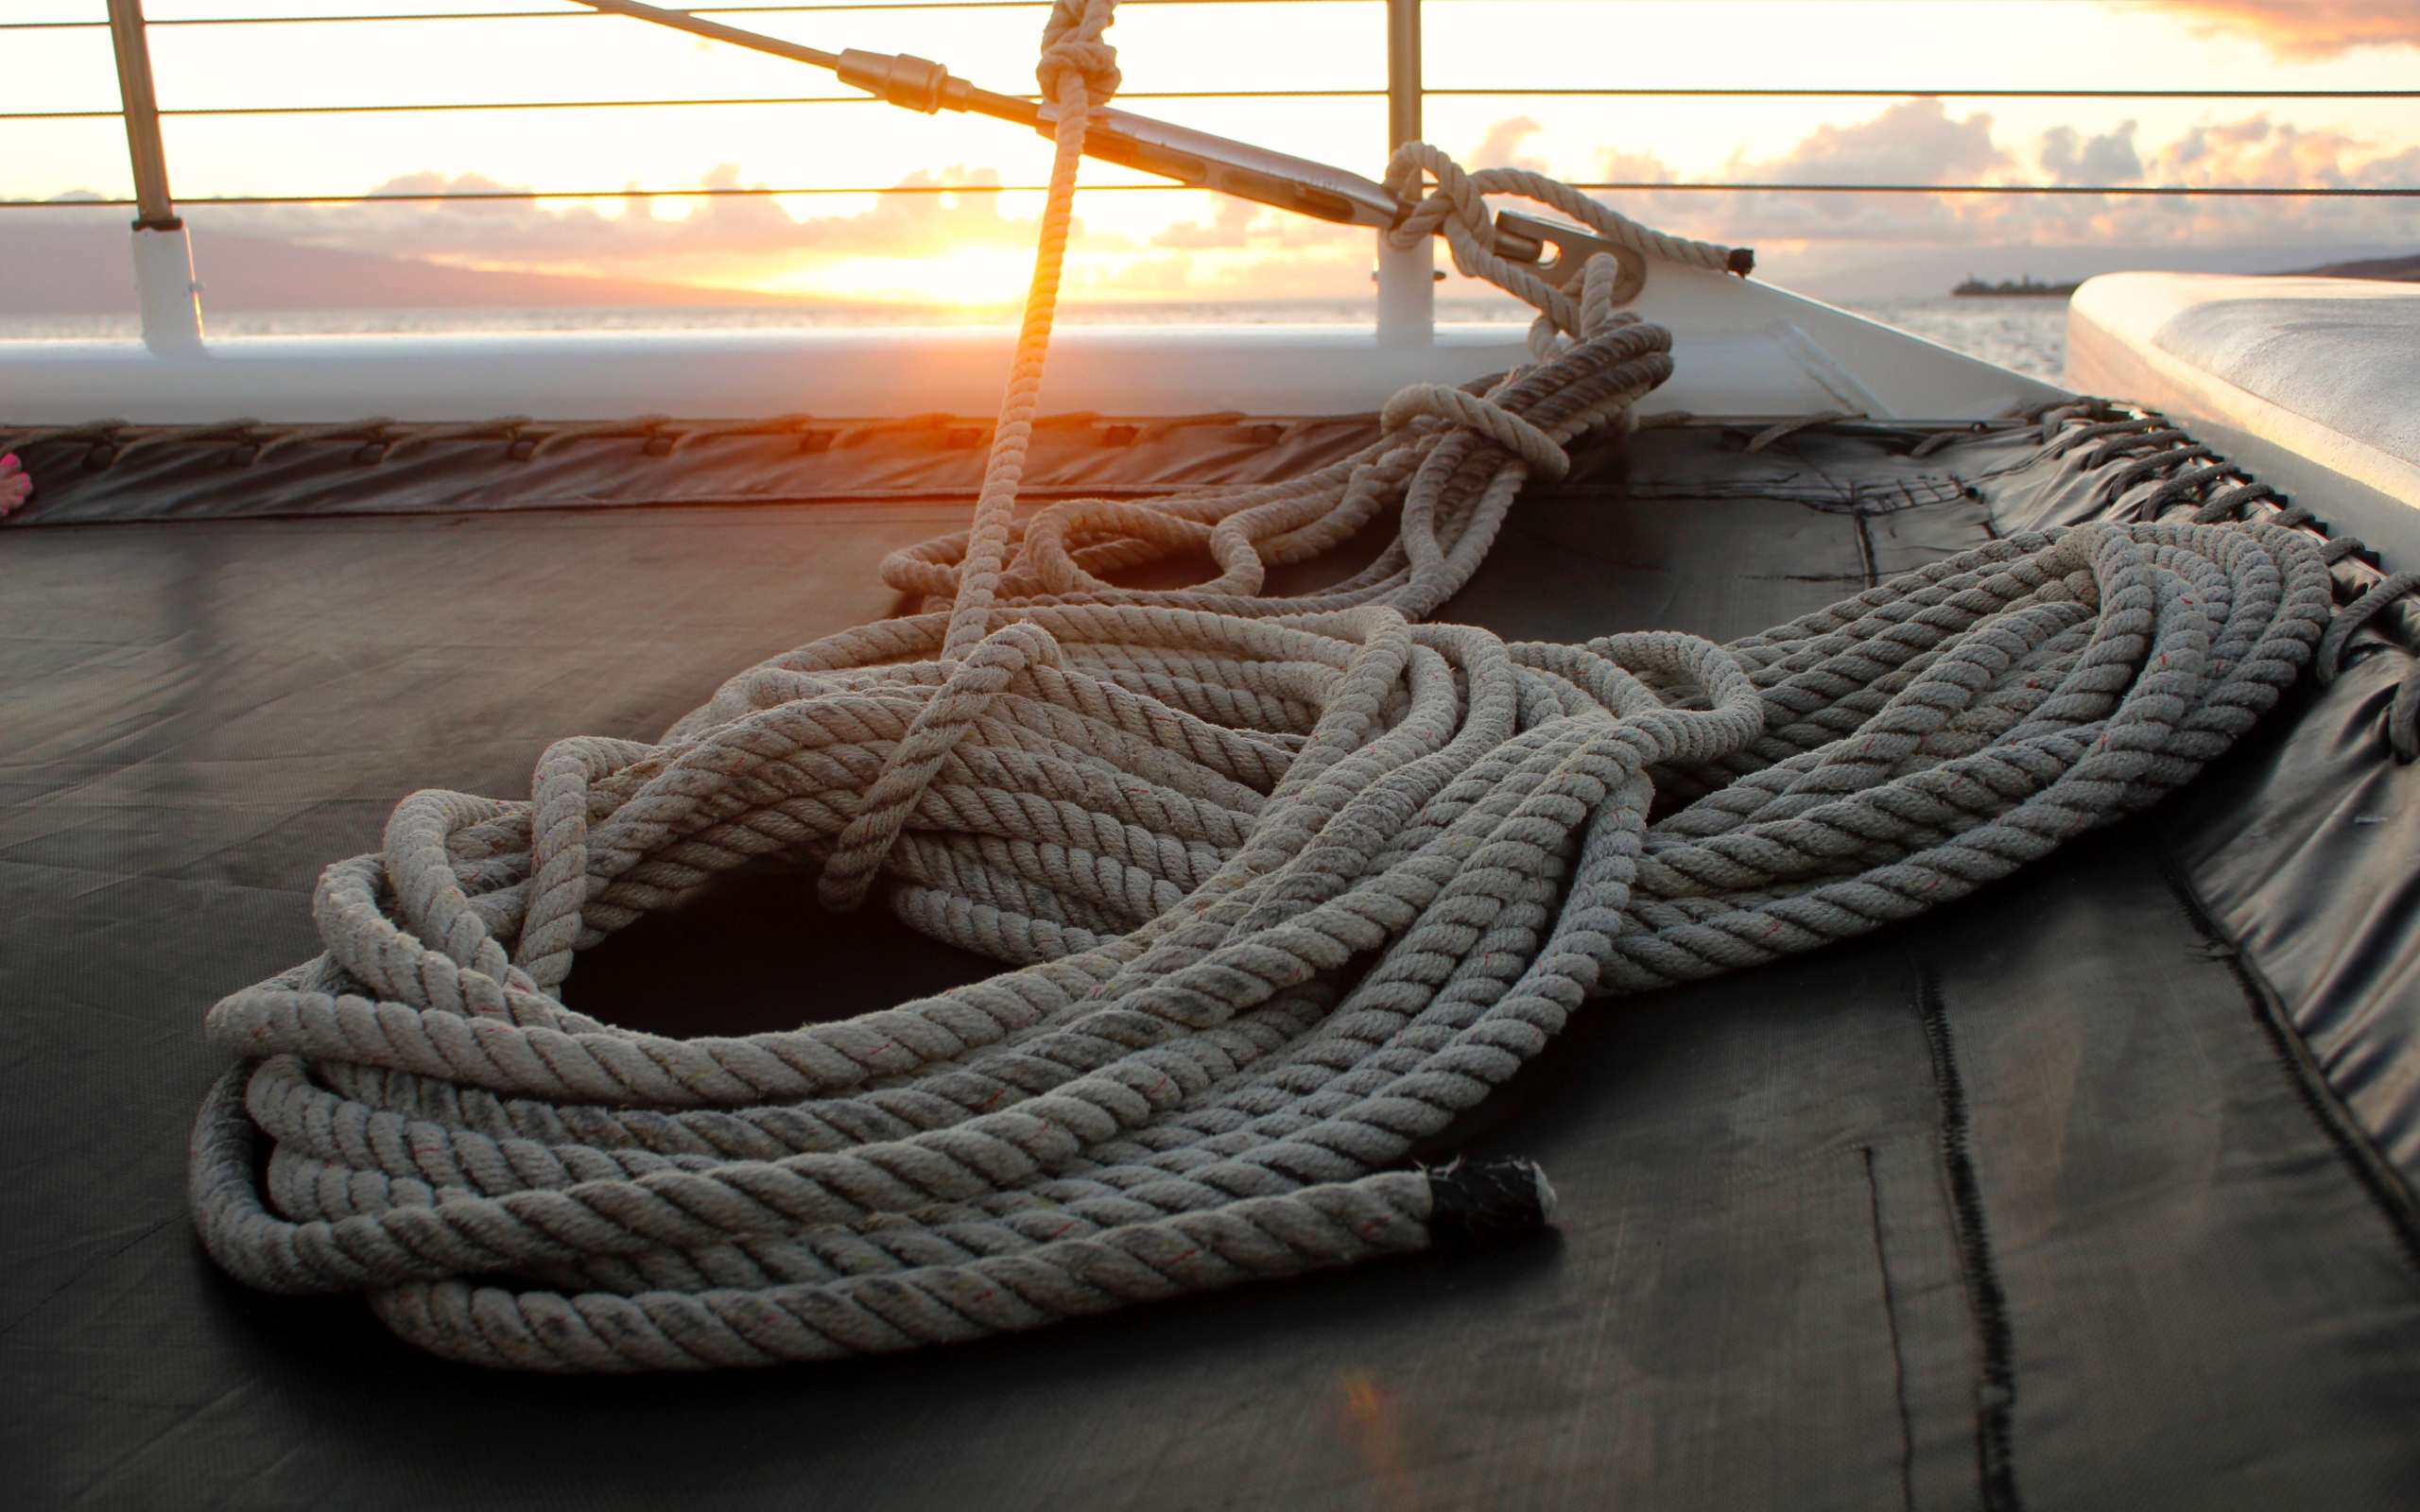 A harpoon with a rope lies on board the yacht